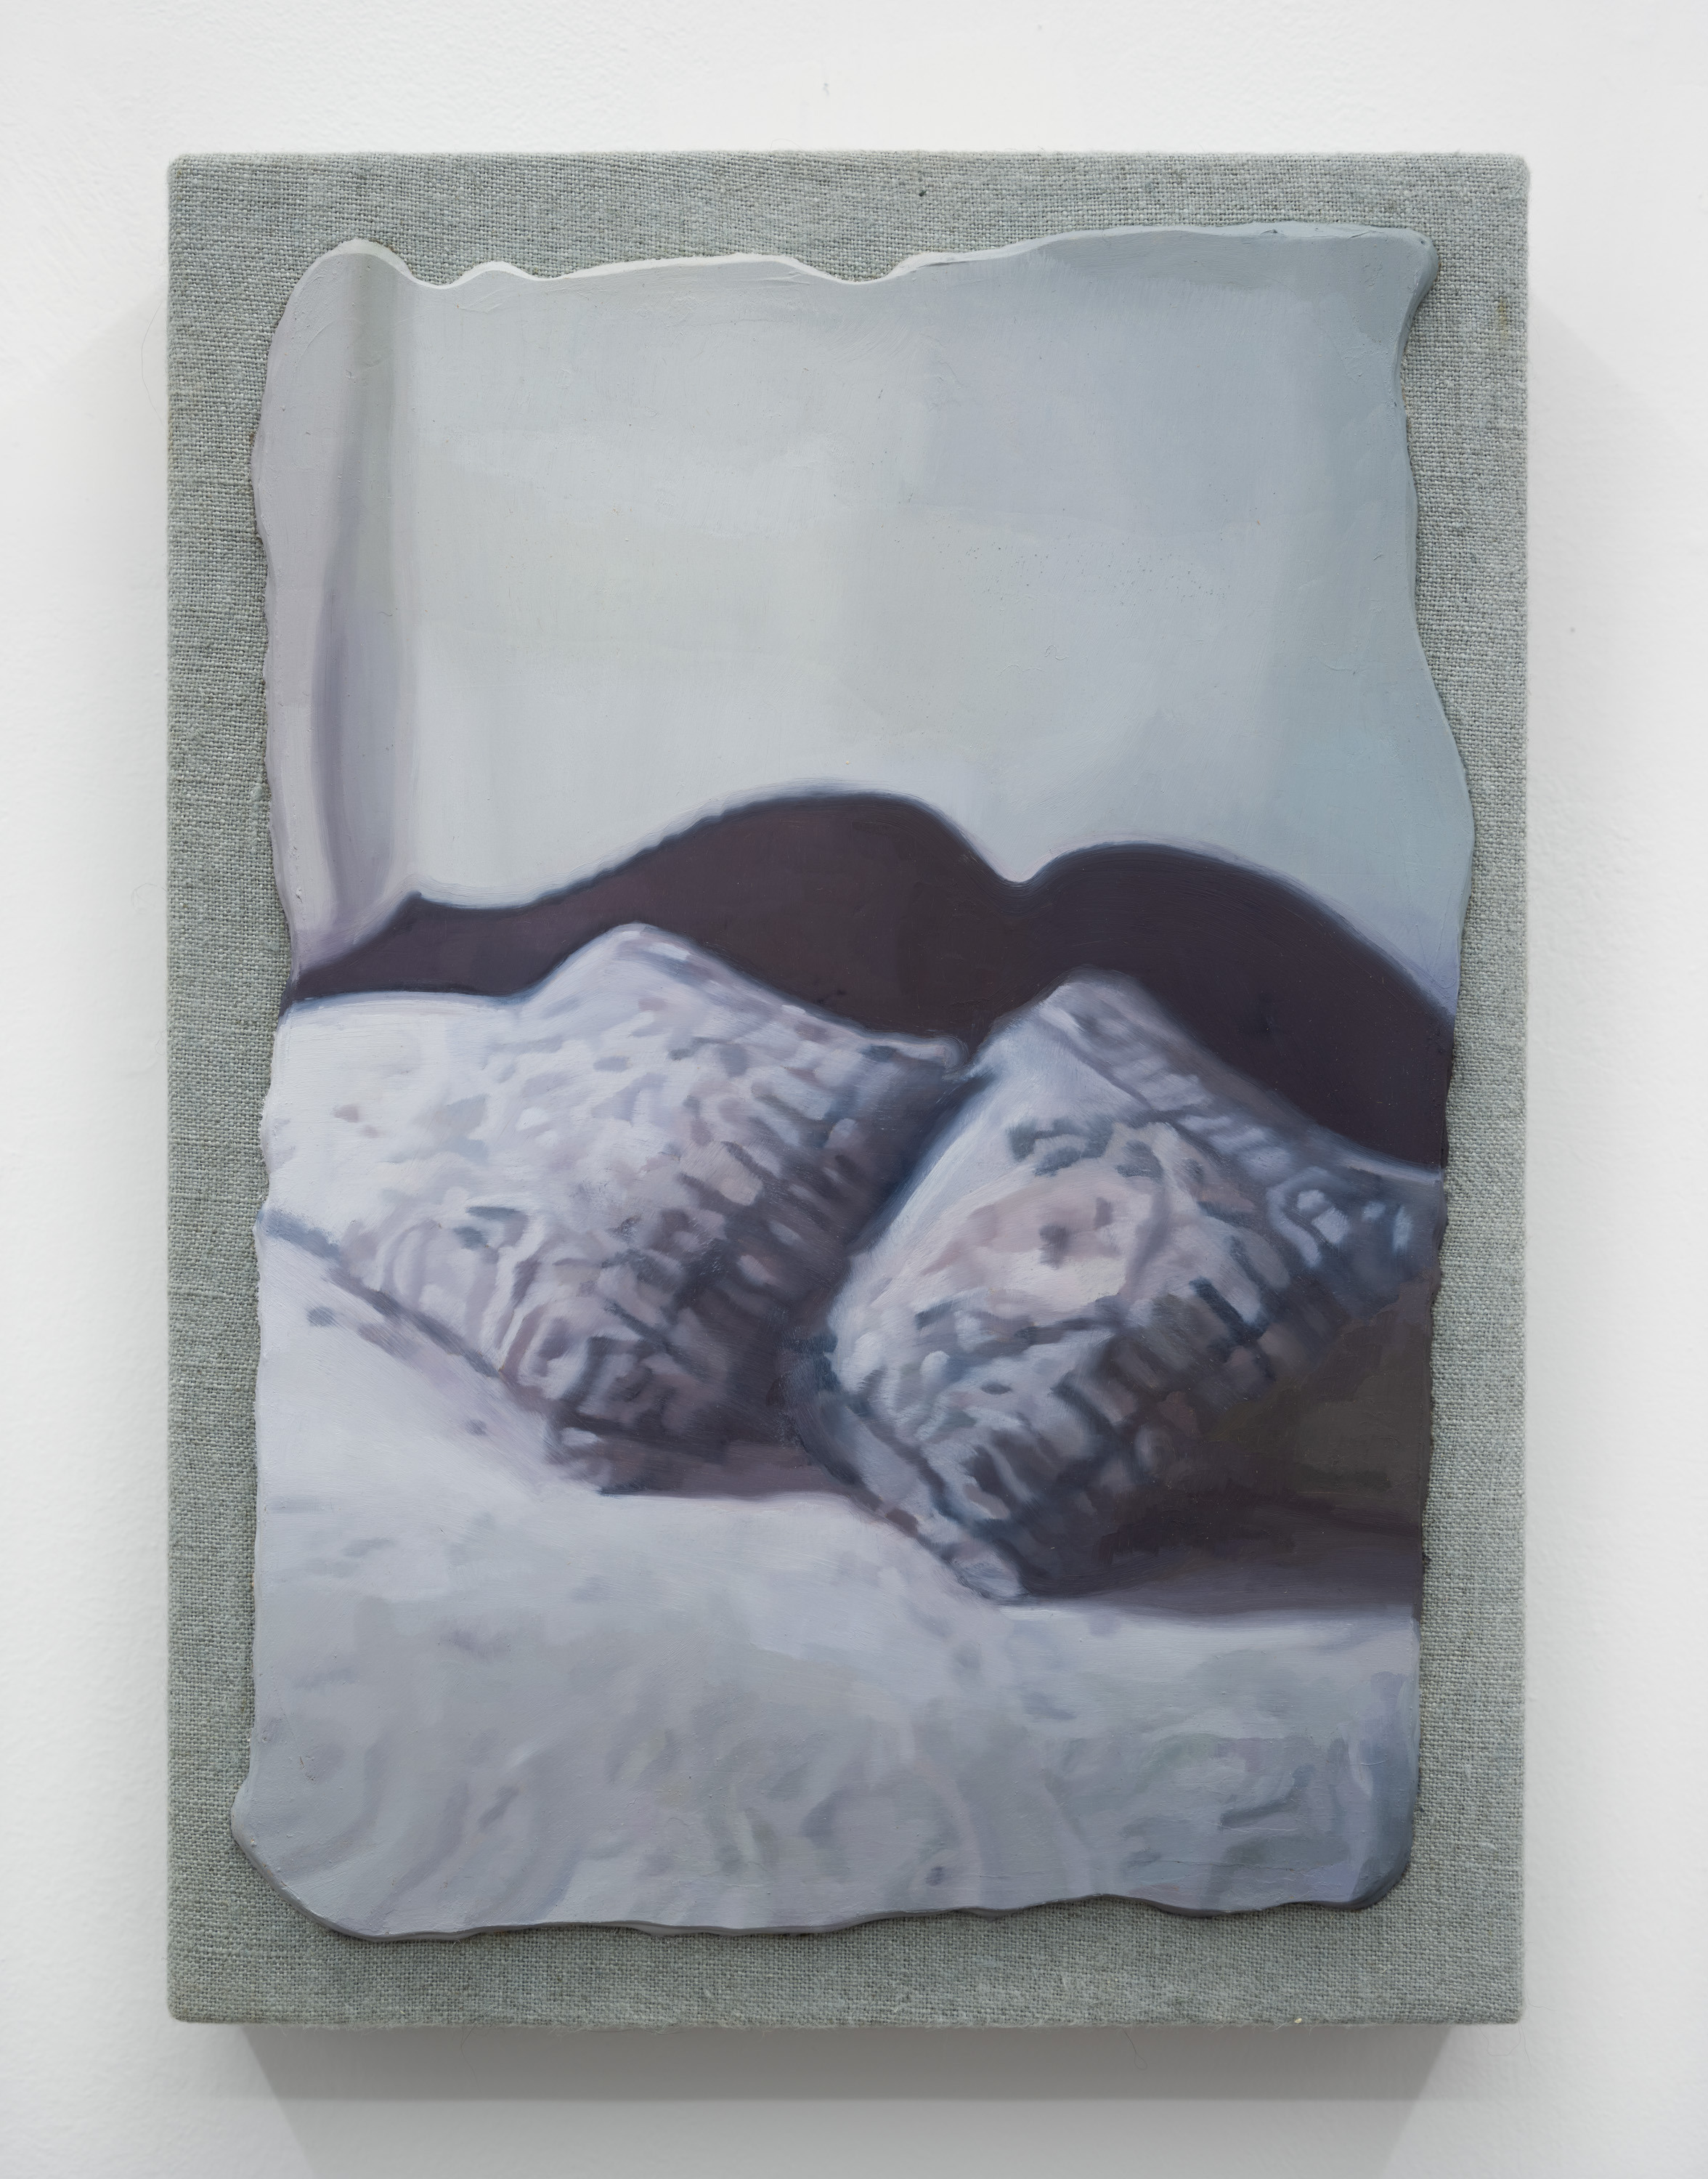 Metope: Bed, 2023 Oil on linen stretched panel 12.25 x 9 inches